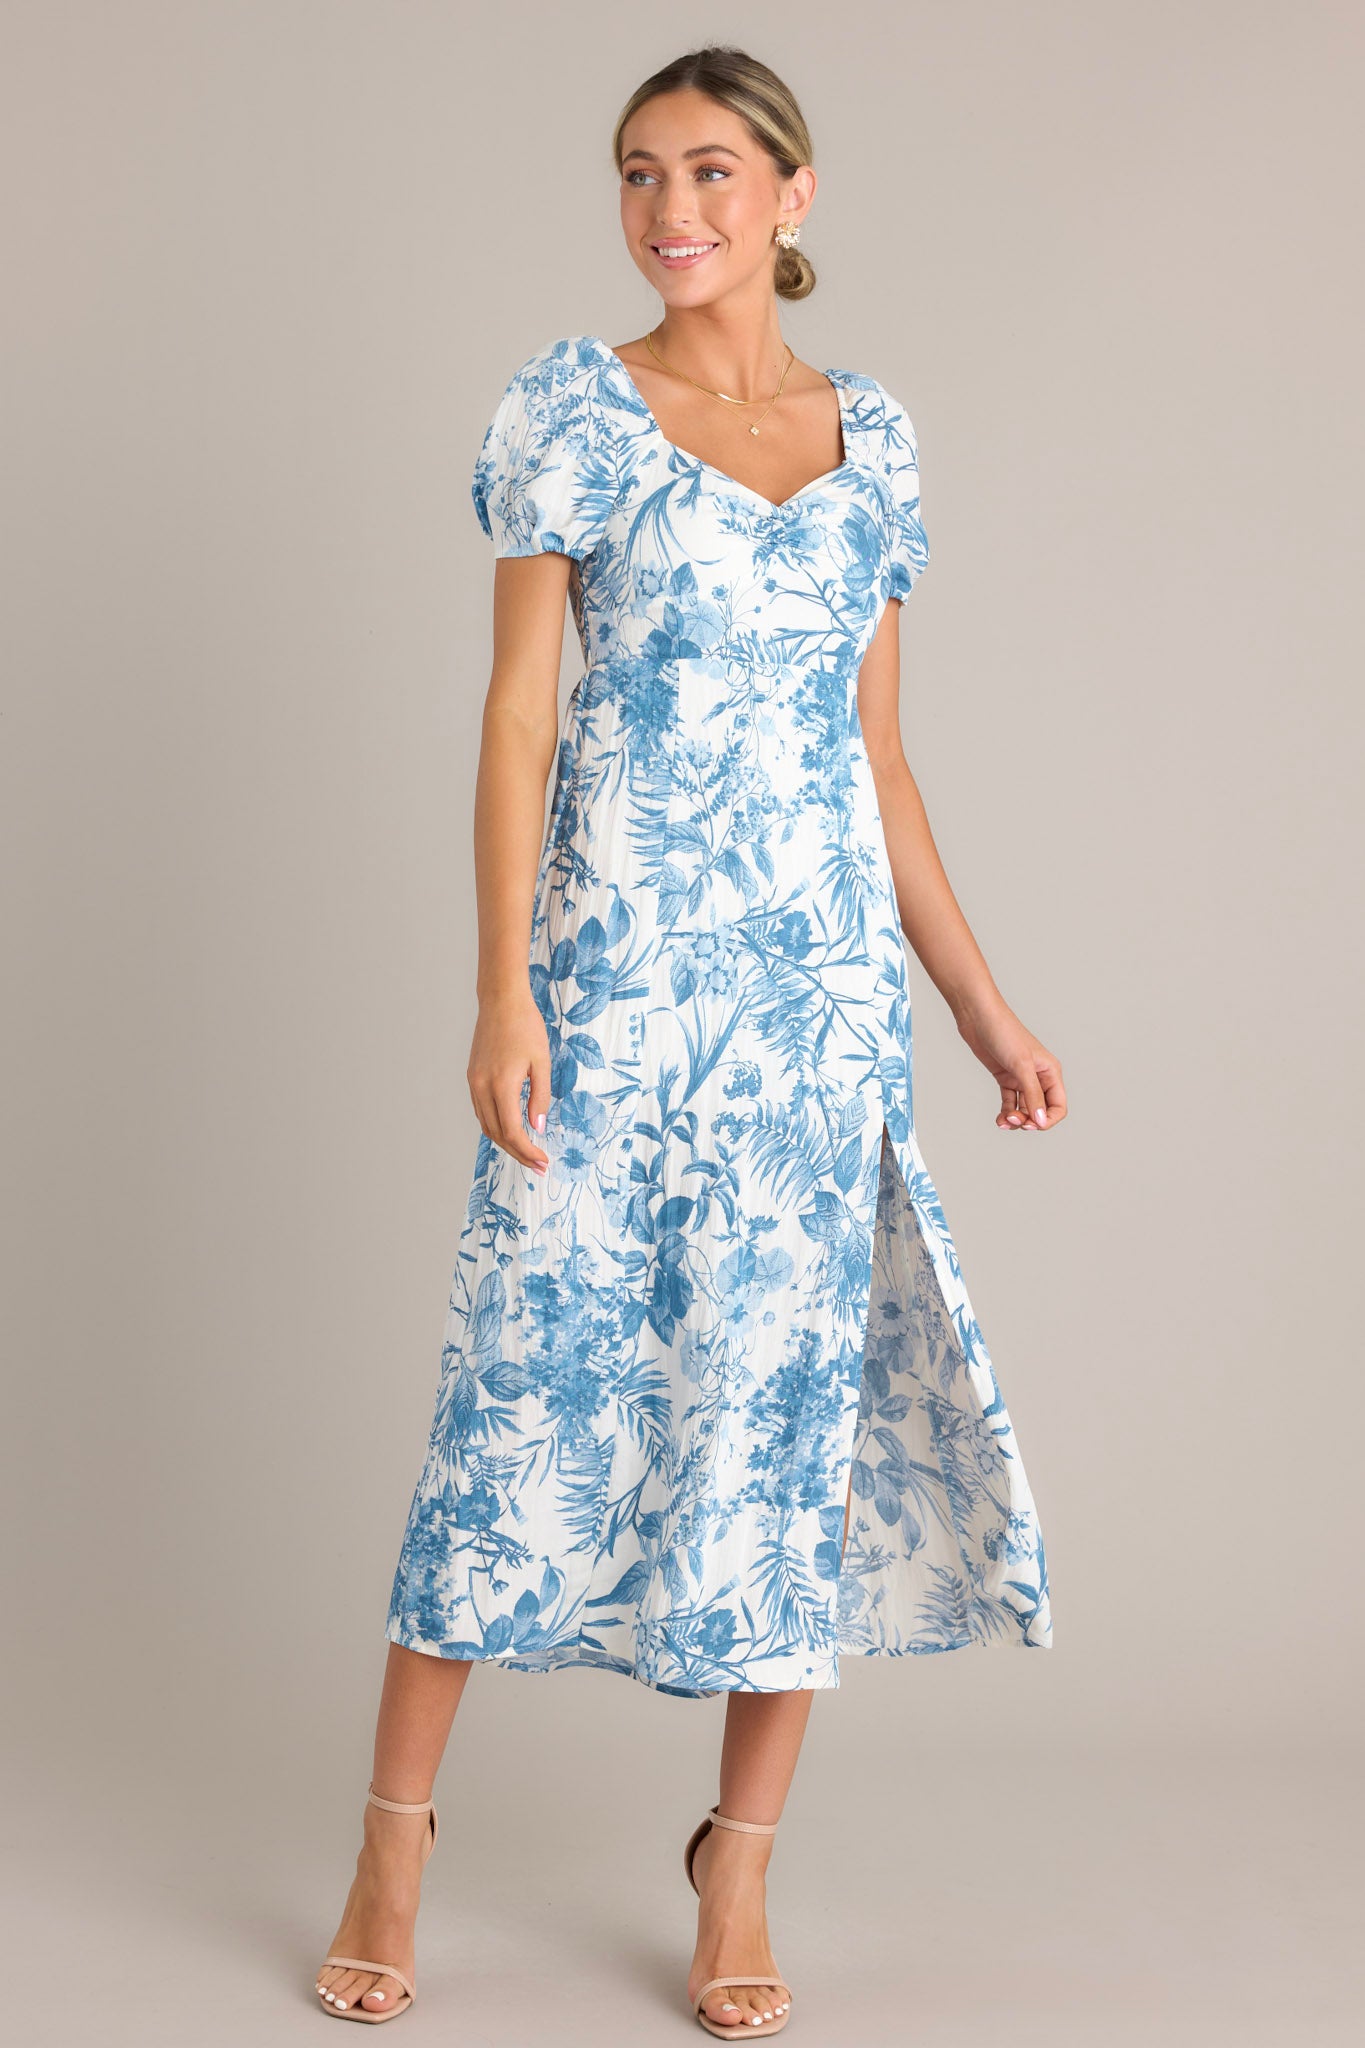 Blue floral midi dress with a sweetheart neckline, short puff sleeves, fitted bodice, cinched waist, and a mid-length skirt with a front slit.